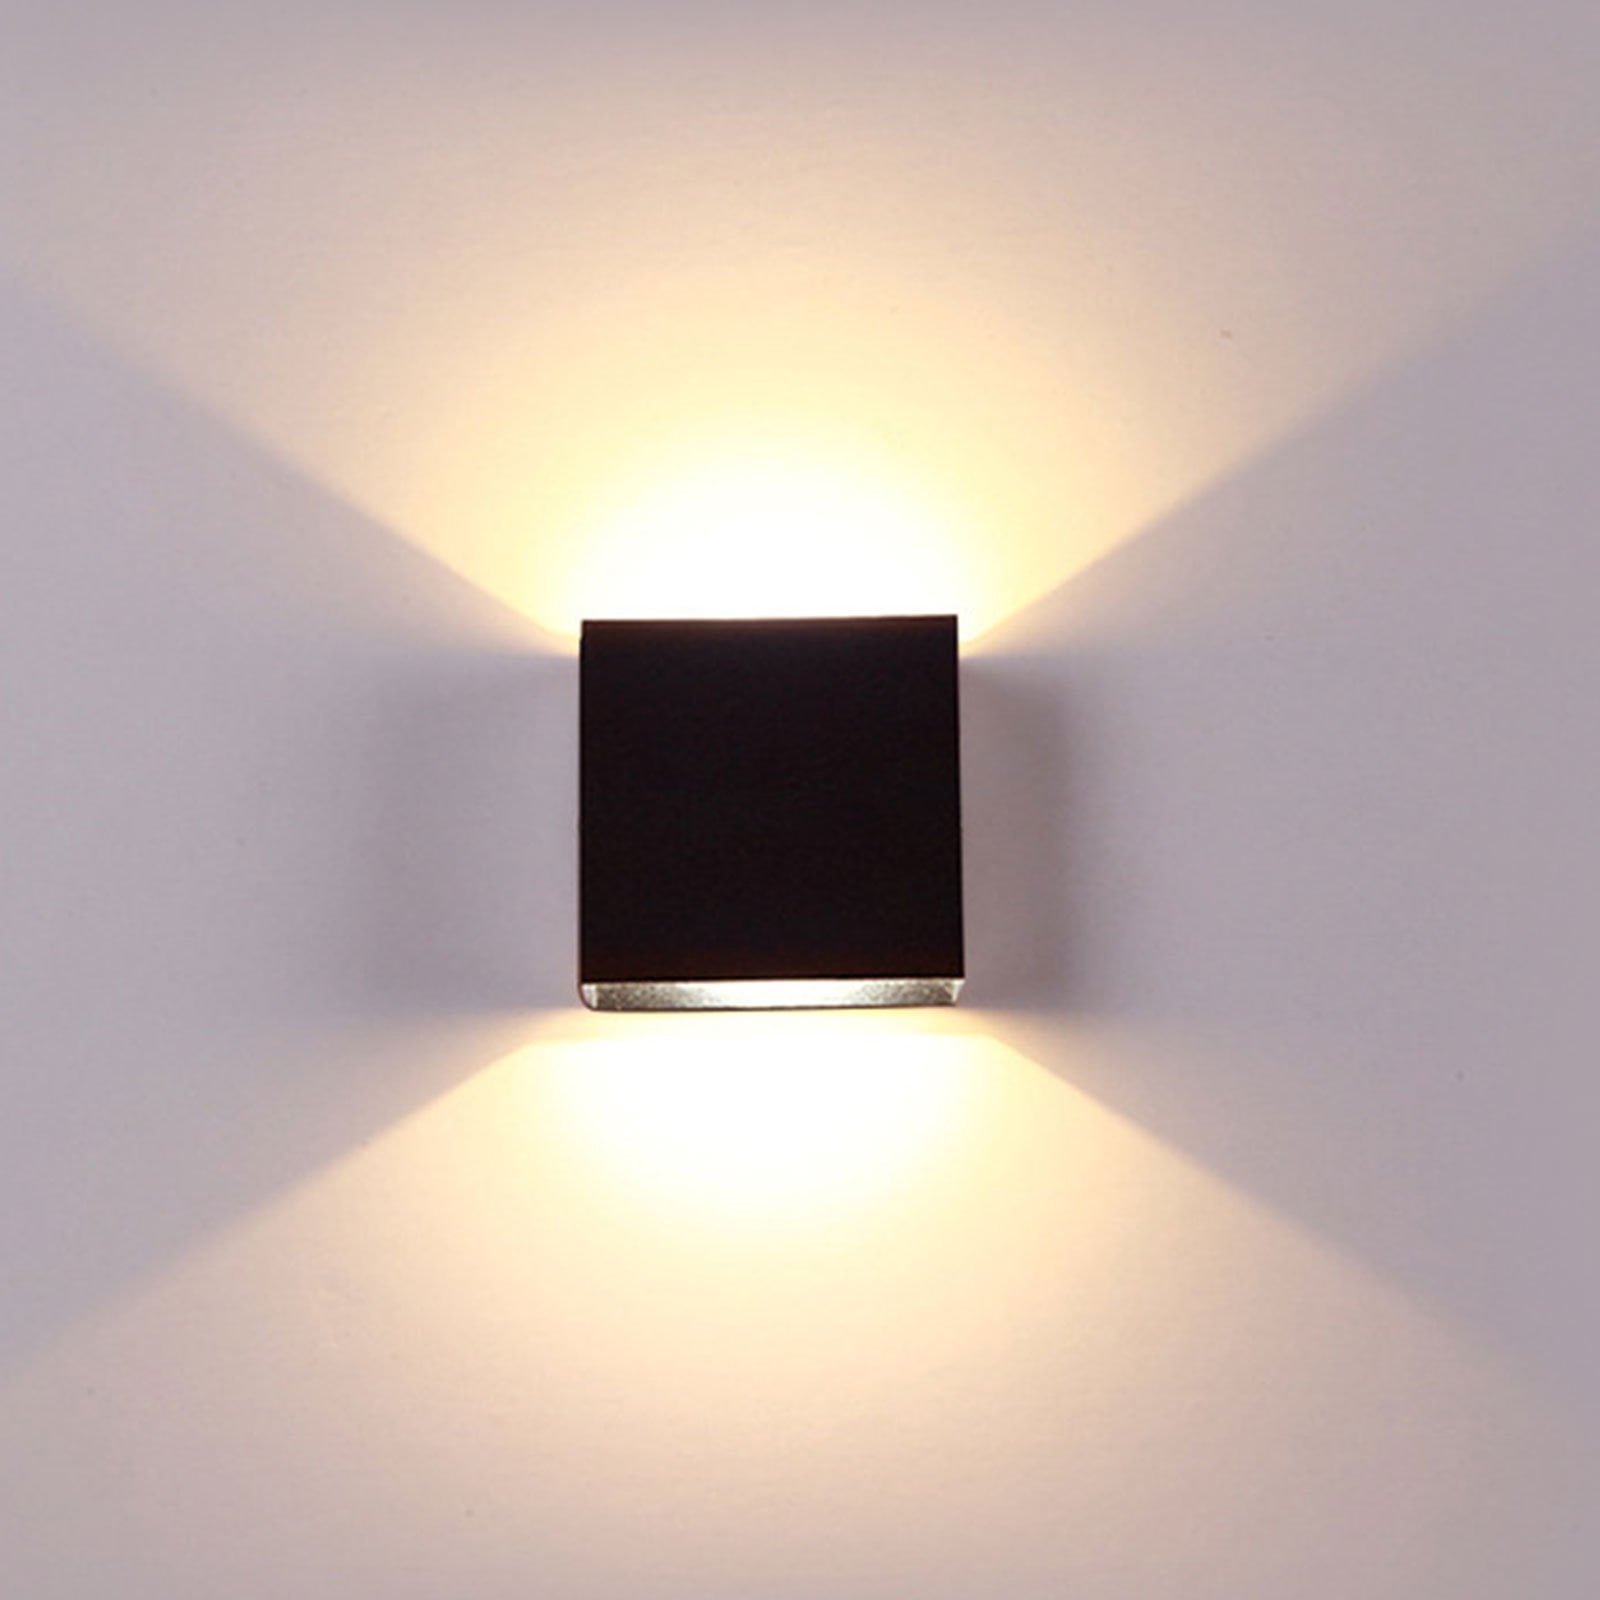 Indoor Modern COB LED Wall Light Up Down Cube Outdoor Sconce Lighting Lamp 6/12W 